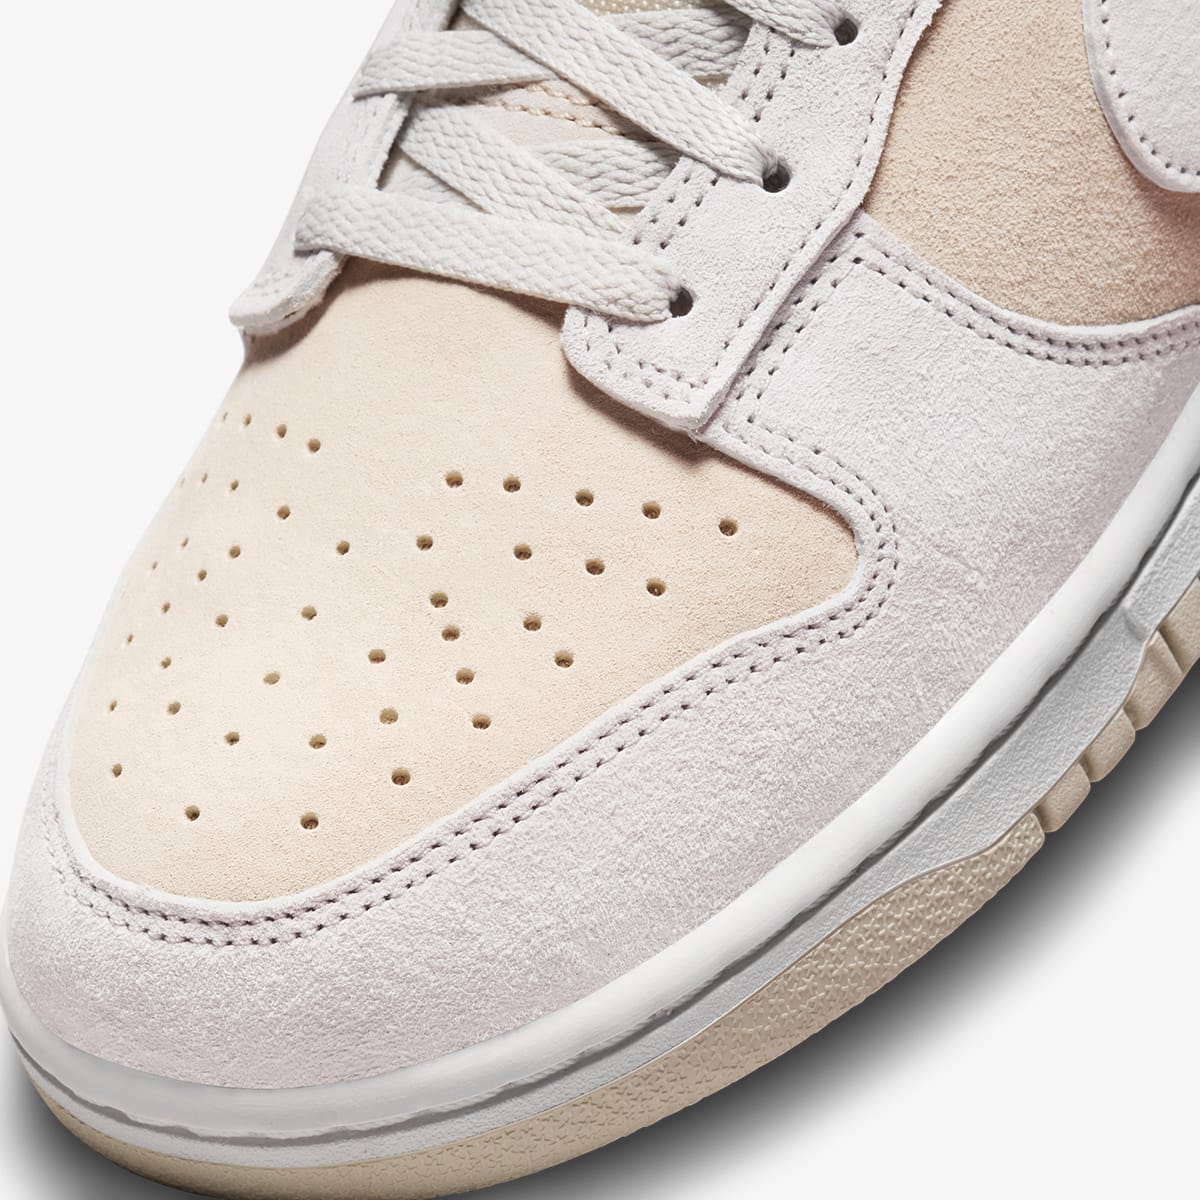 Nike Dunk Low Retro PRM (Vast Grey & Summit White) | END. Launches